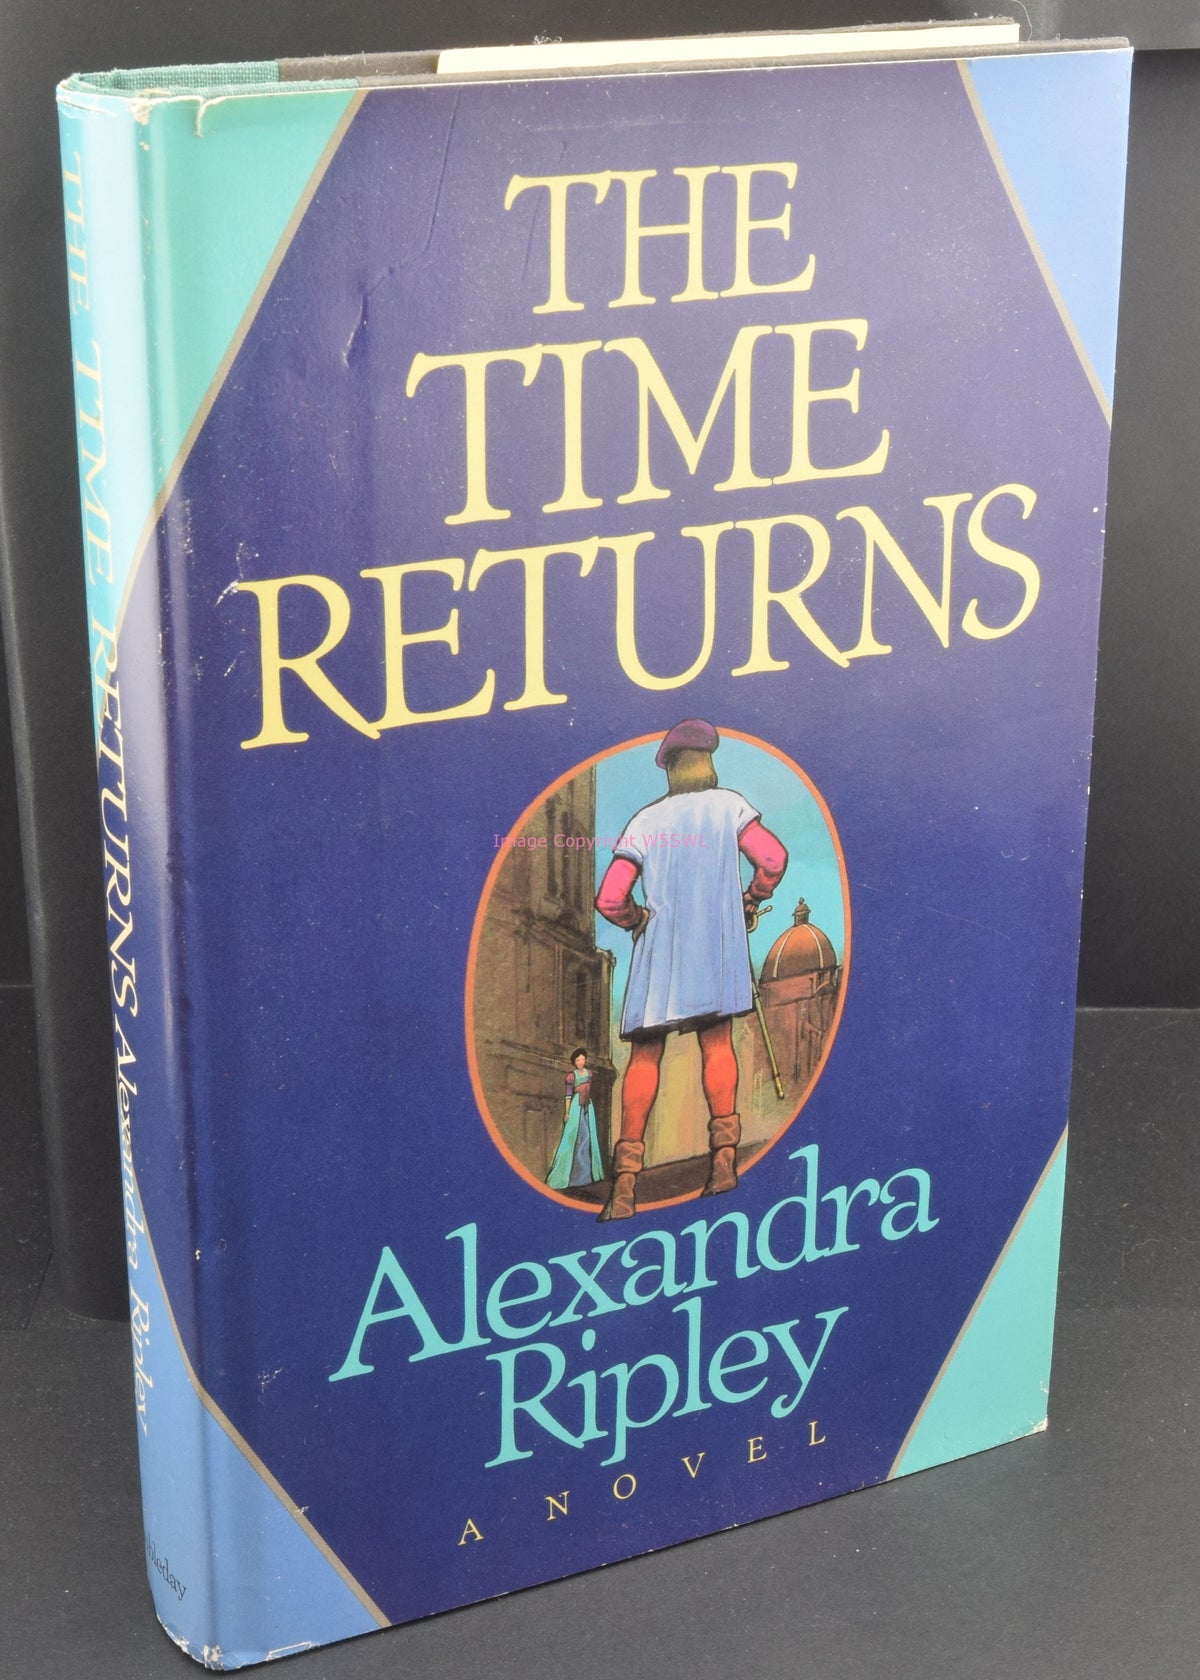 The Time Returns by Alexandra Ripley - Dave's Hobby Shop by W5SWL